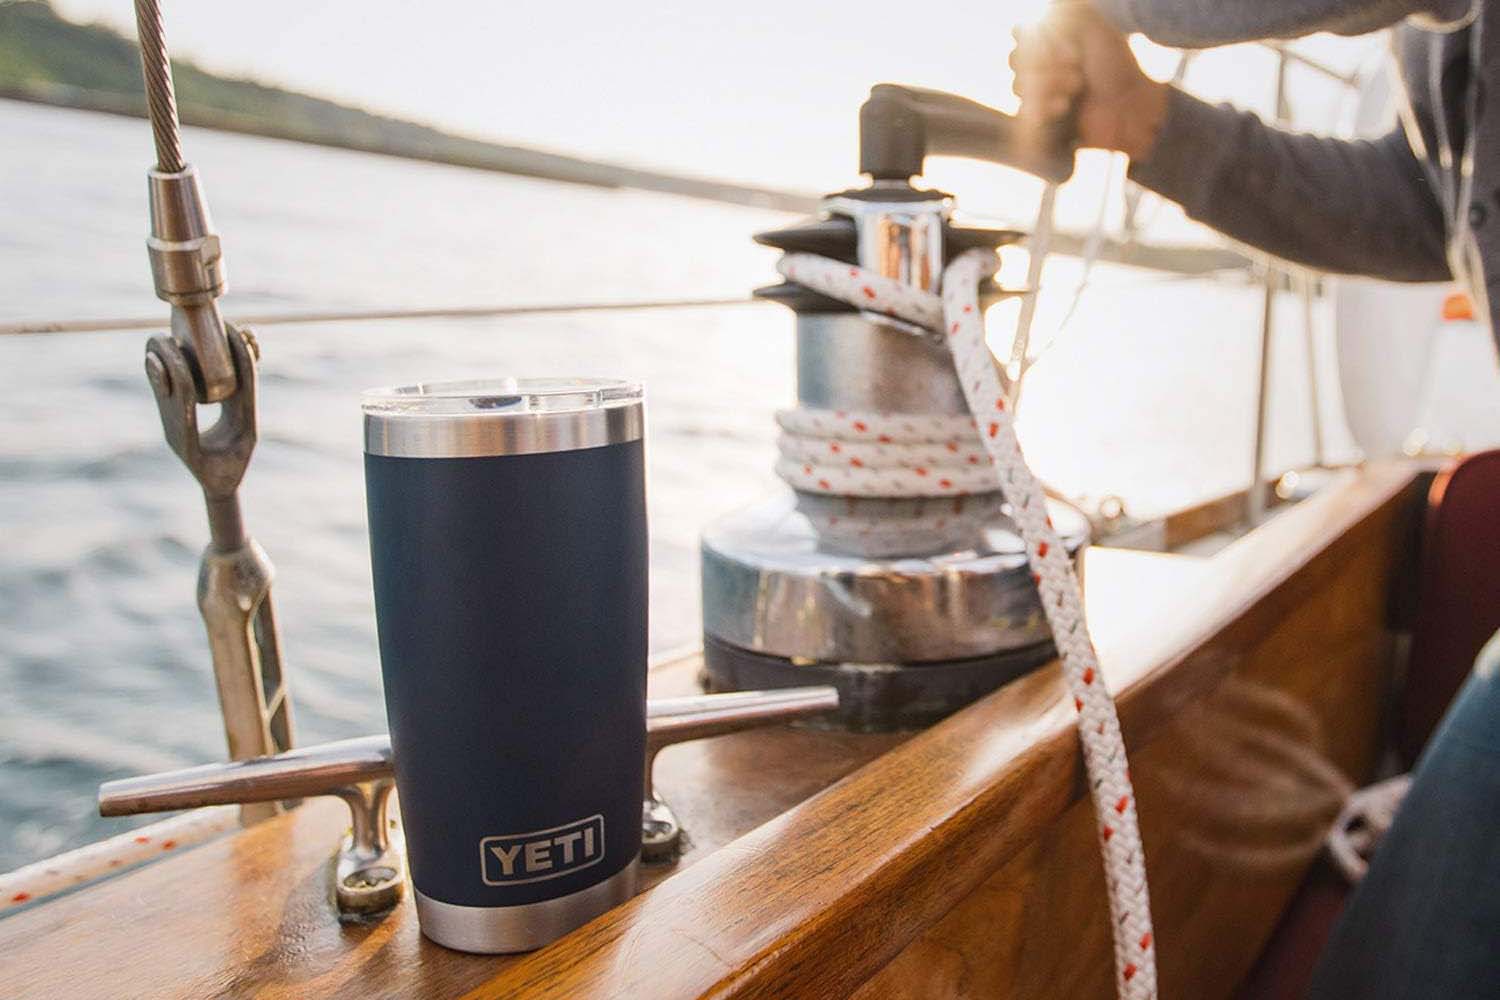 The Best Gifts for a Yeti Devotee Option Yeti Rambler 20-Ounce Tumbler